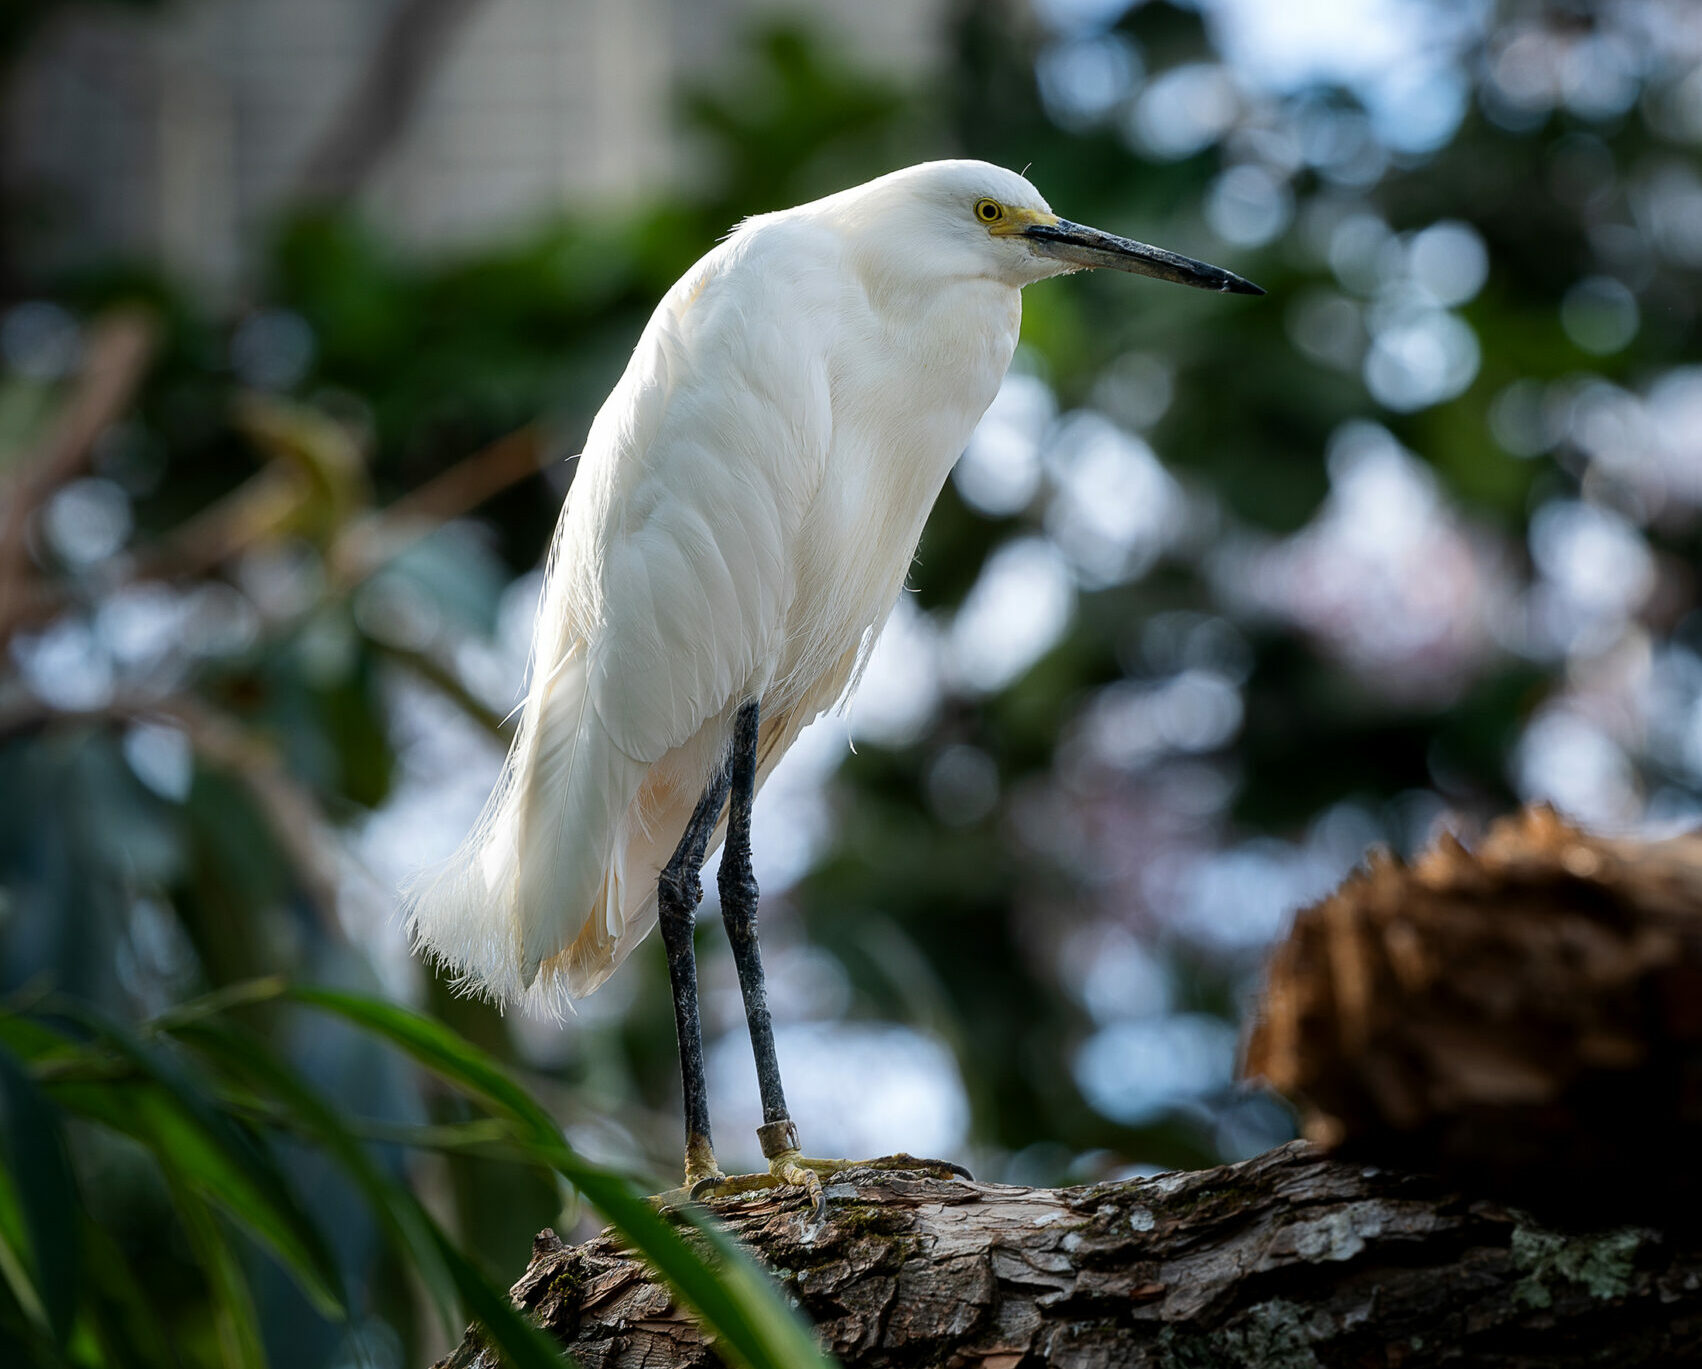 Snowy Egret at the National Aviary.